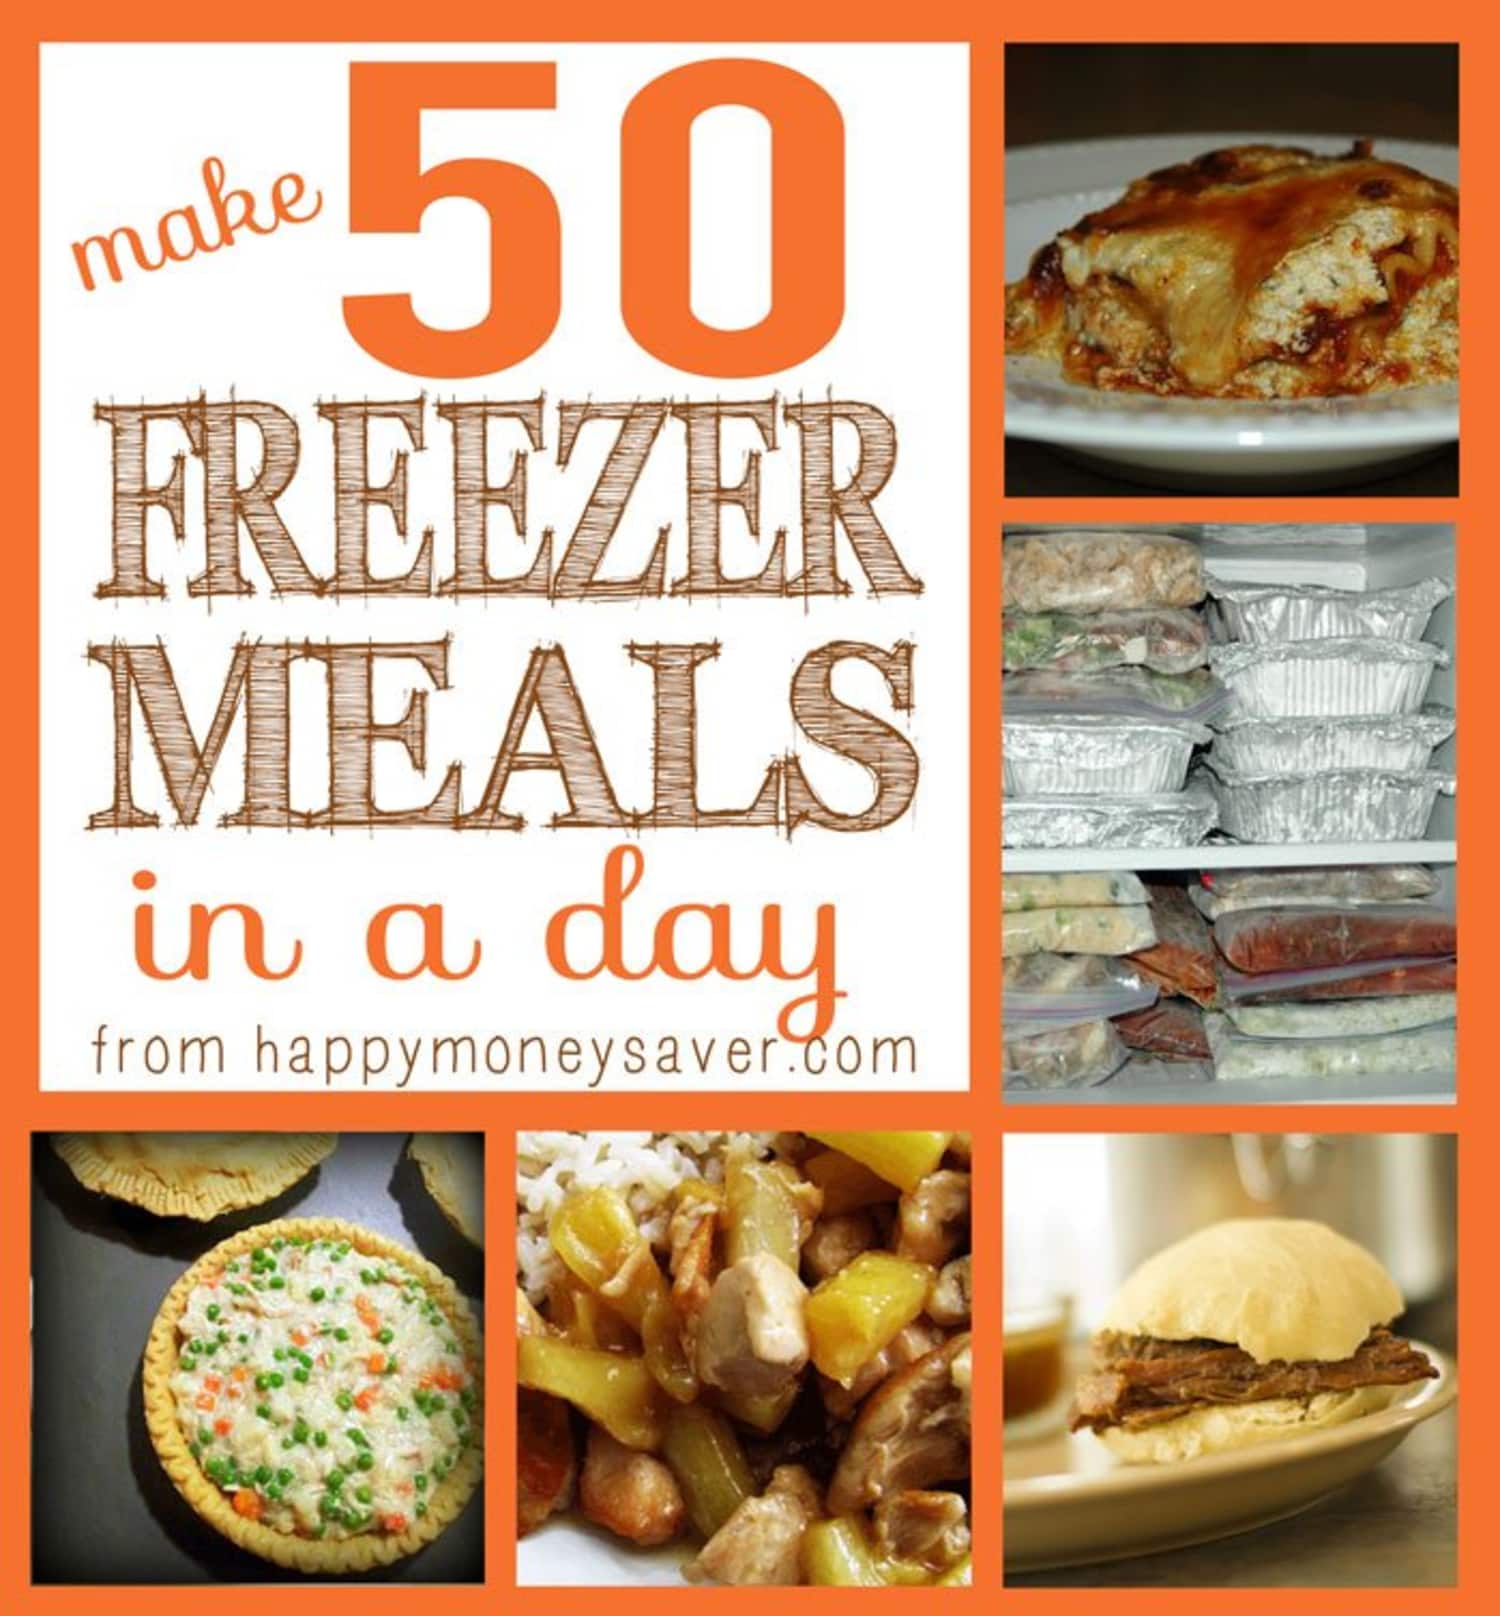 10 Freezer Meal Plans from Real Home Cooks | Kitchn